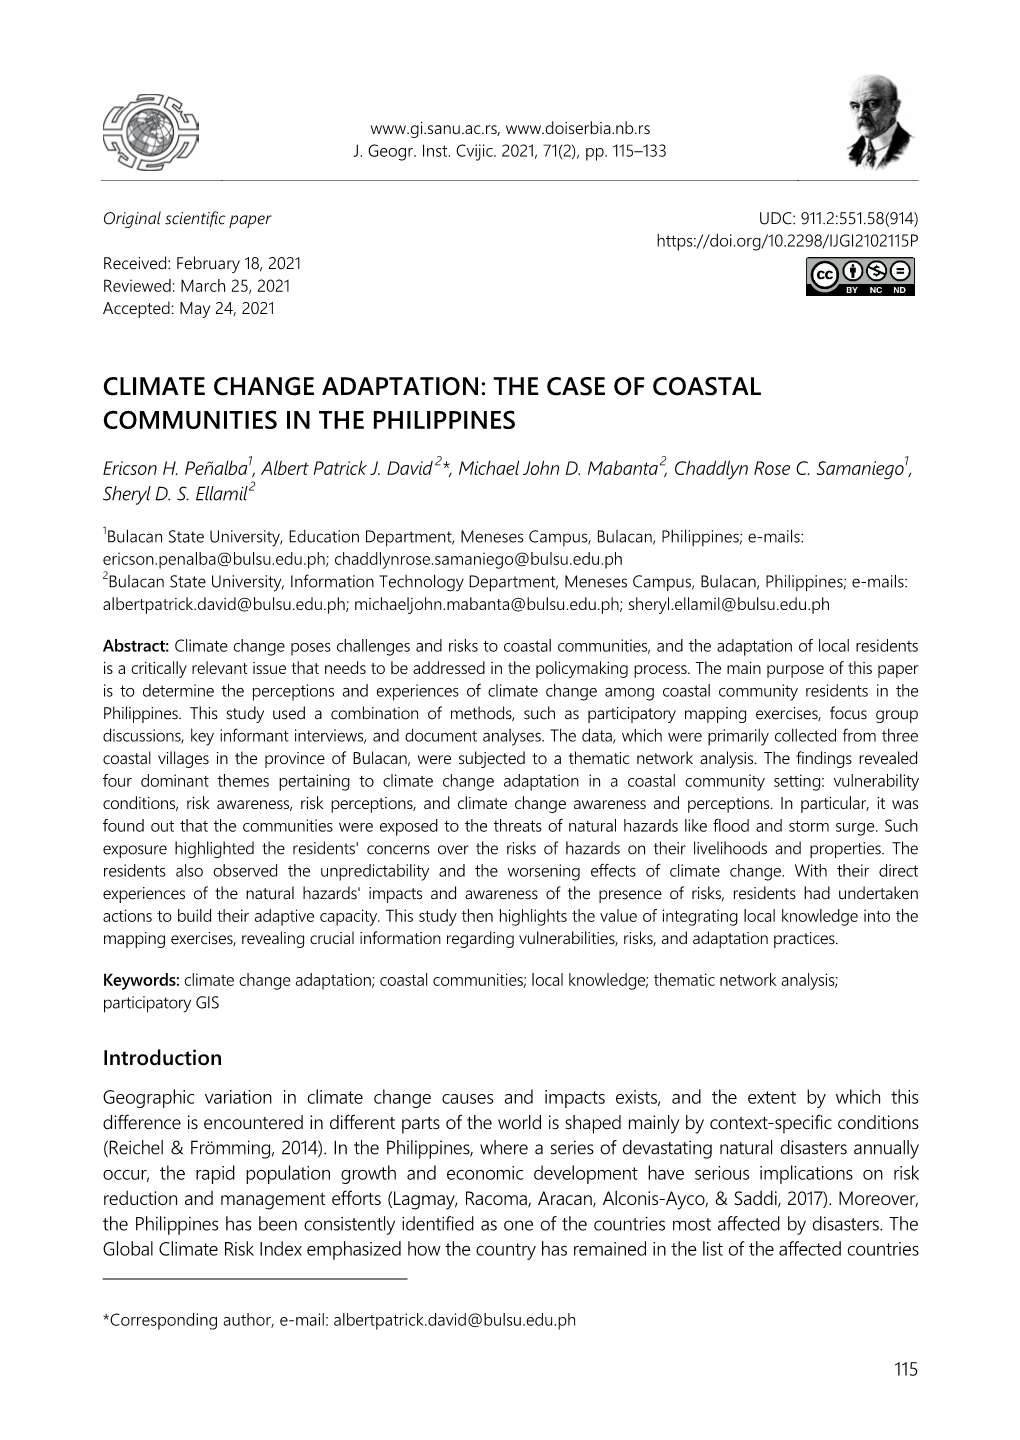 Climate Change Adaptation: the Case of Coastal Communities in the Philippines